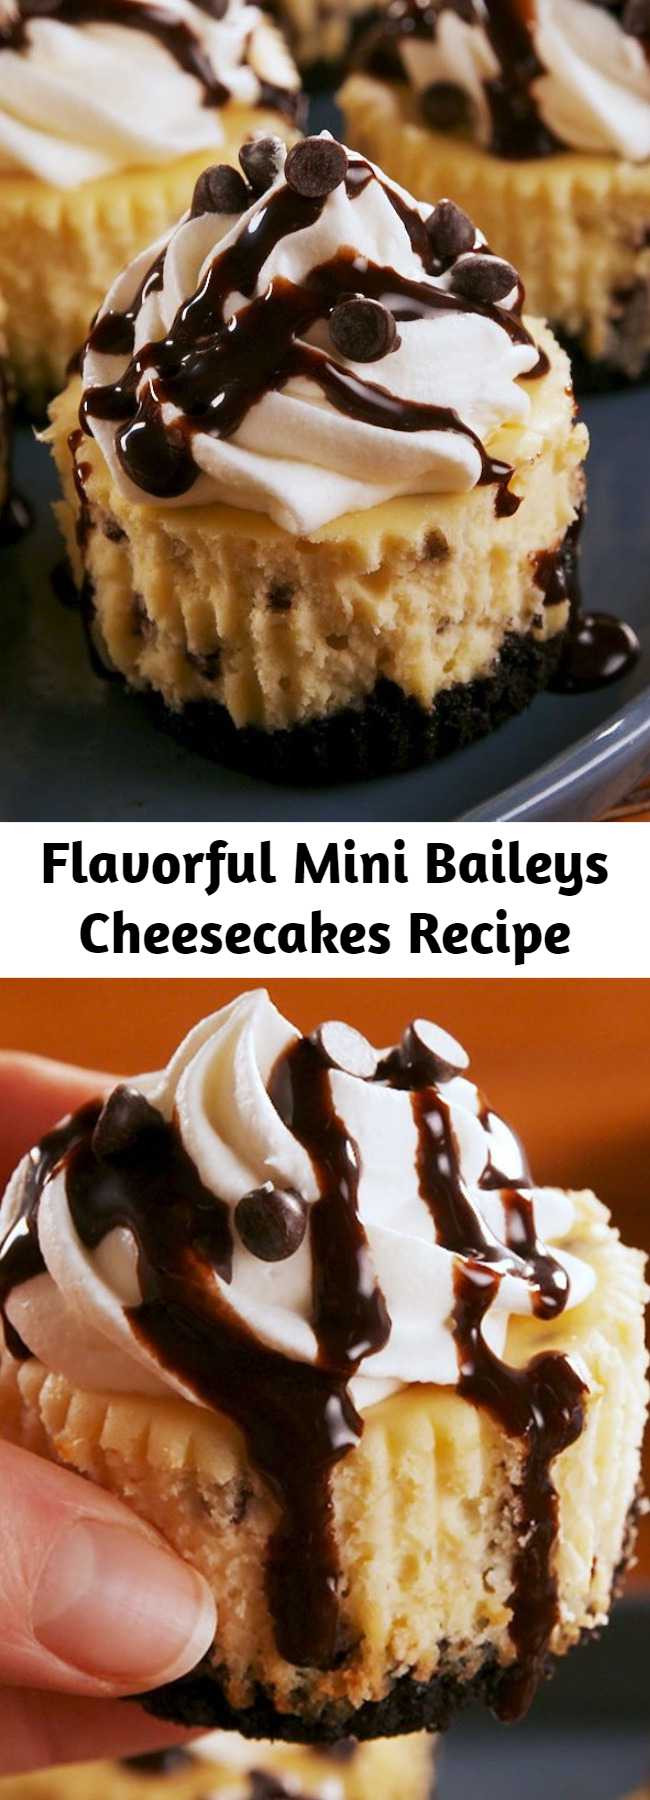 Flavorful Mini Baileys Cheesecakes Recipe - They might be small, but they're bursting with creamy, chocolaty flavor. We're hooked. #easy #recipe #baileys #chocolate #dessert #dessertrecipes #alcohol #stpatricksday #stpaddysday #partyideas